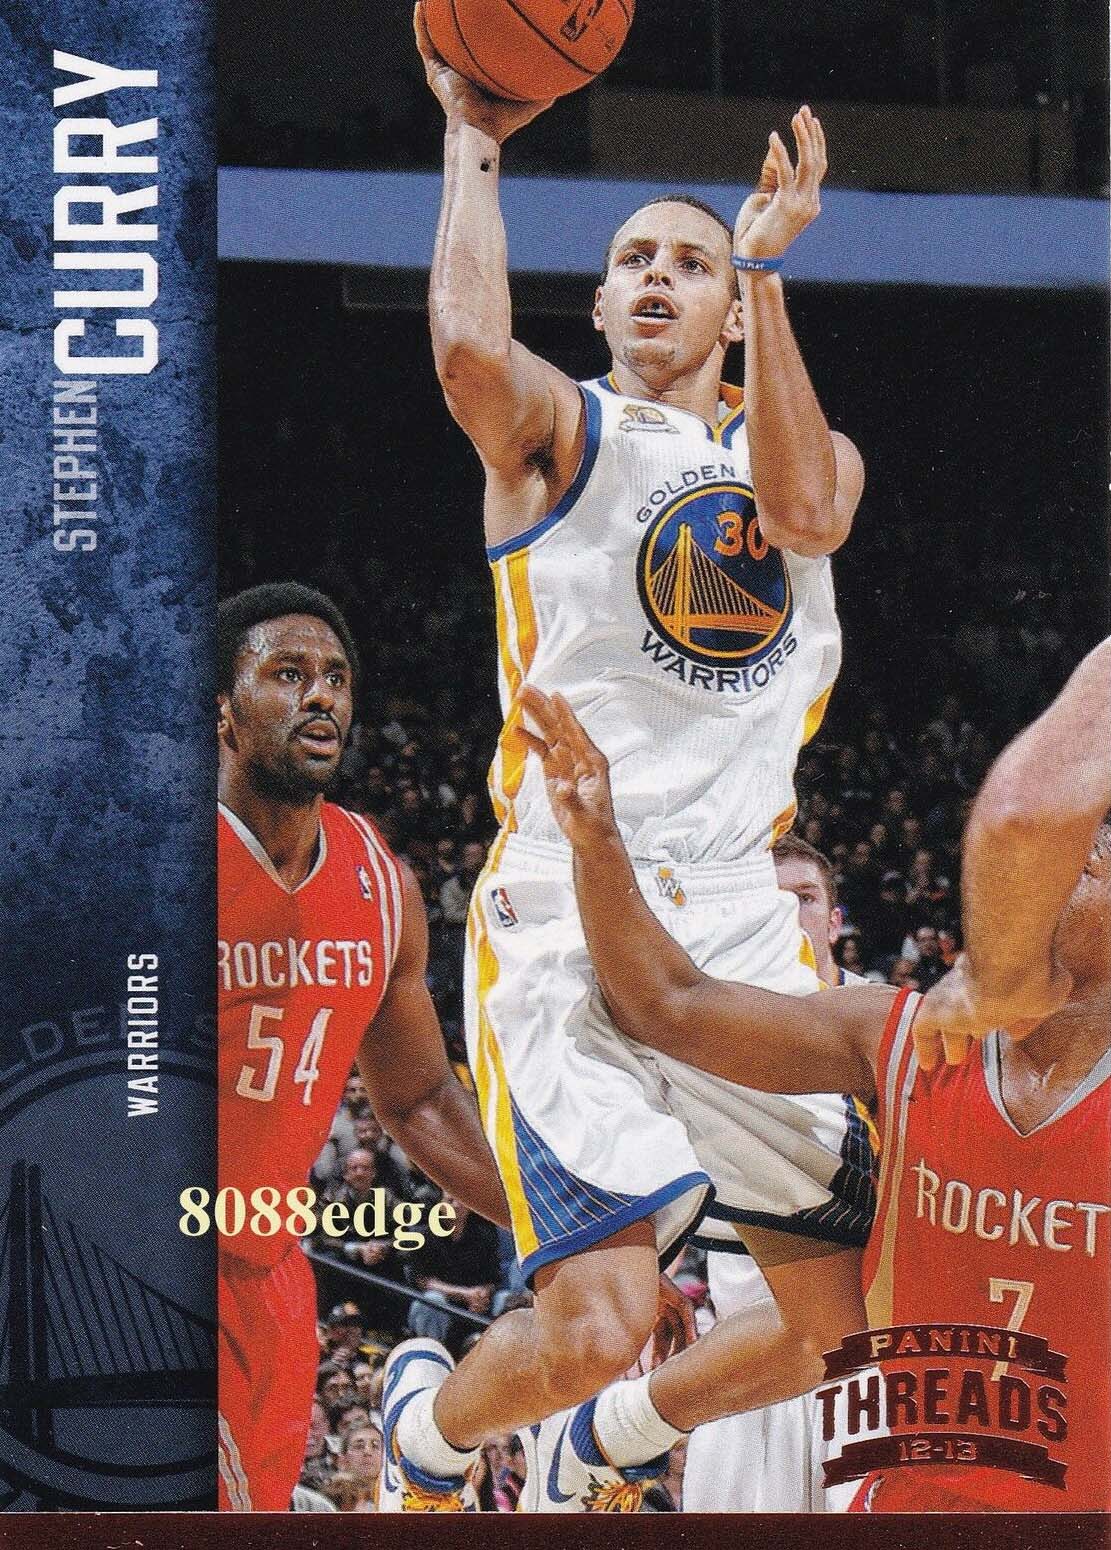 2011-12 Panini Limited Trophy Case Materials Prime /25 Stephen Curry #13  PSA 6